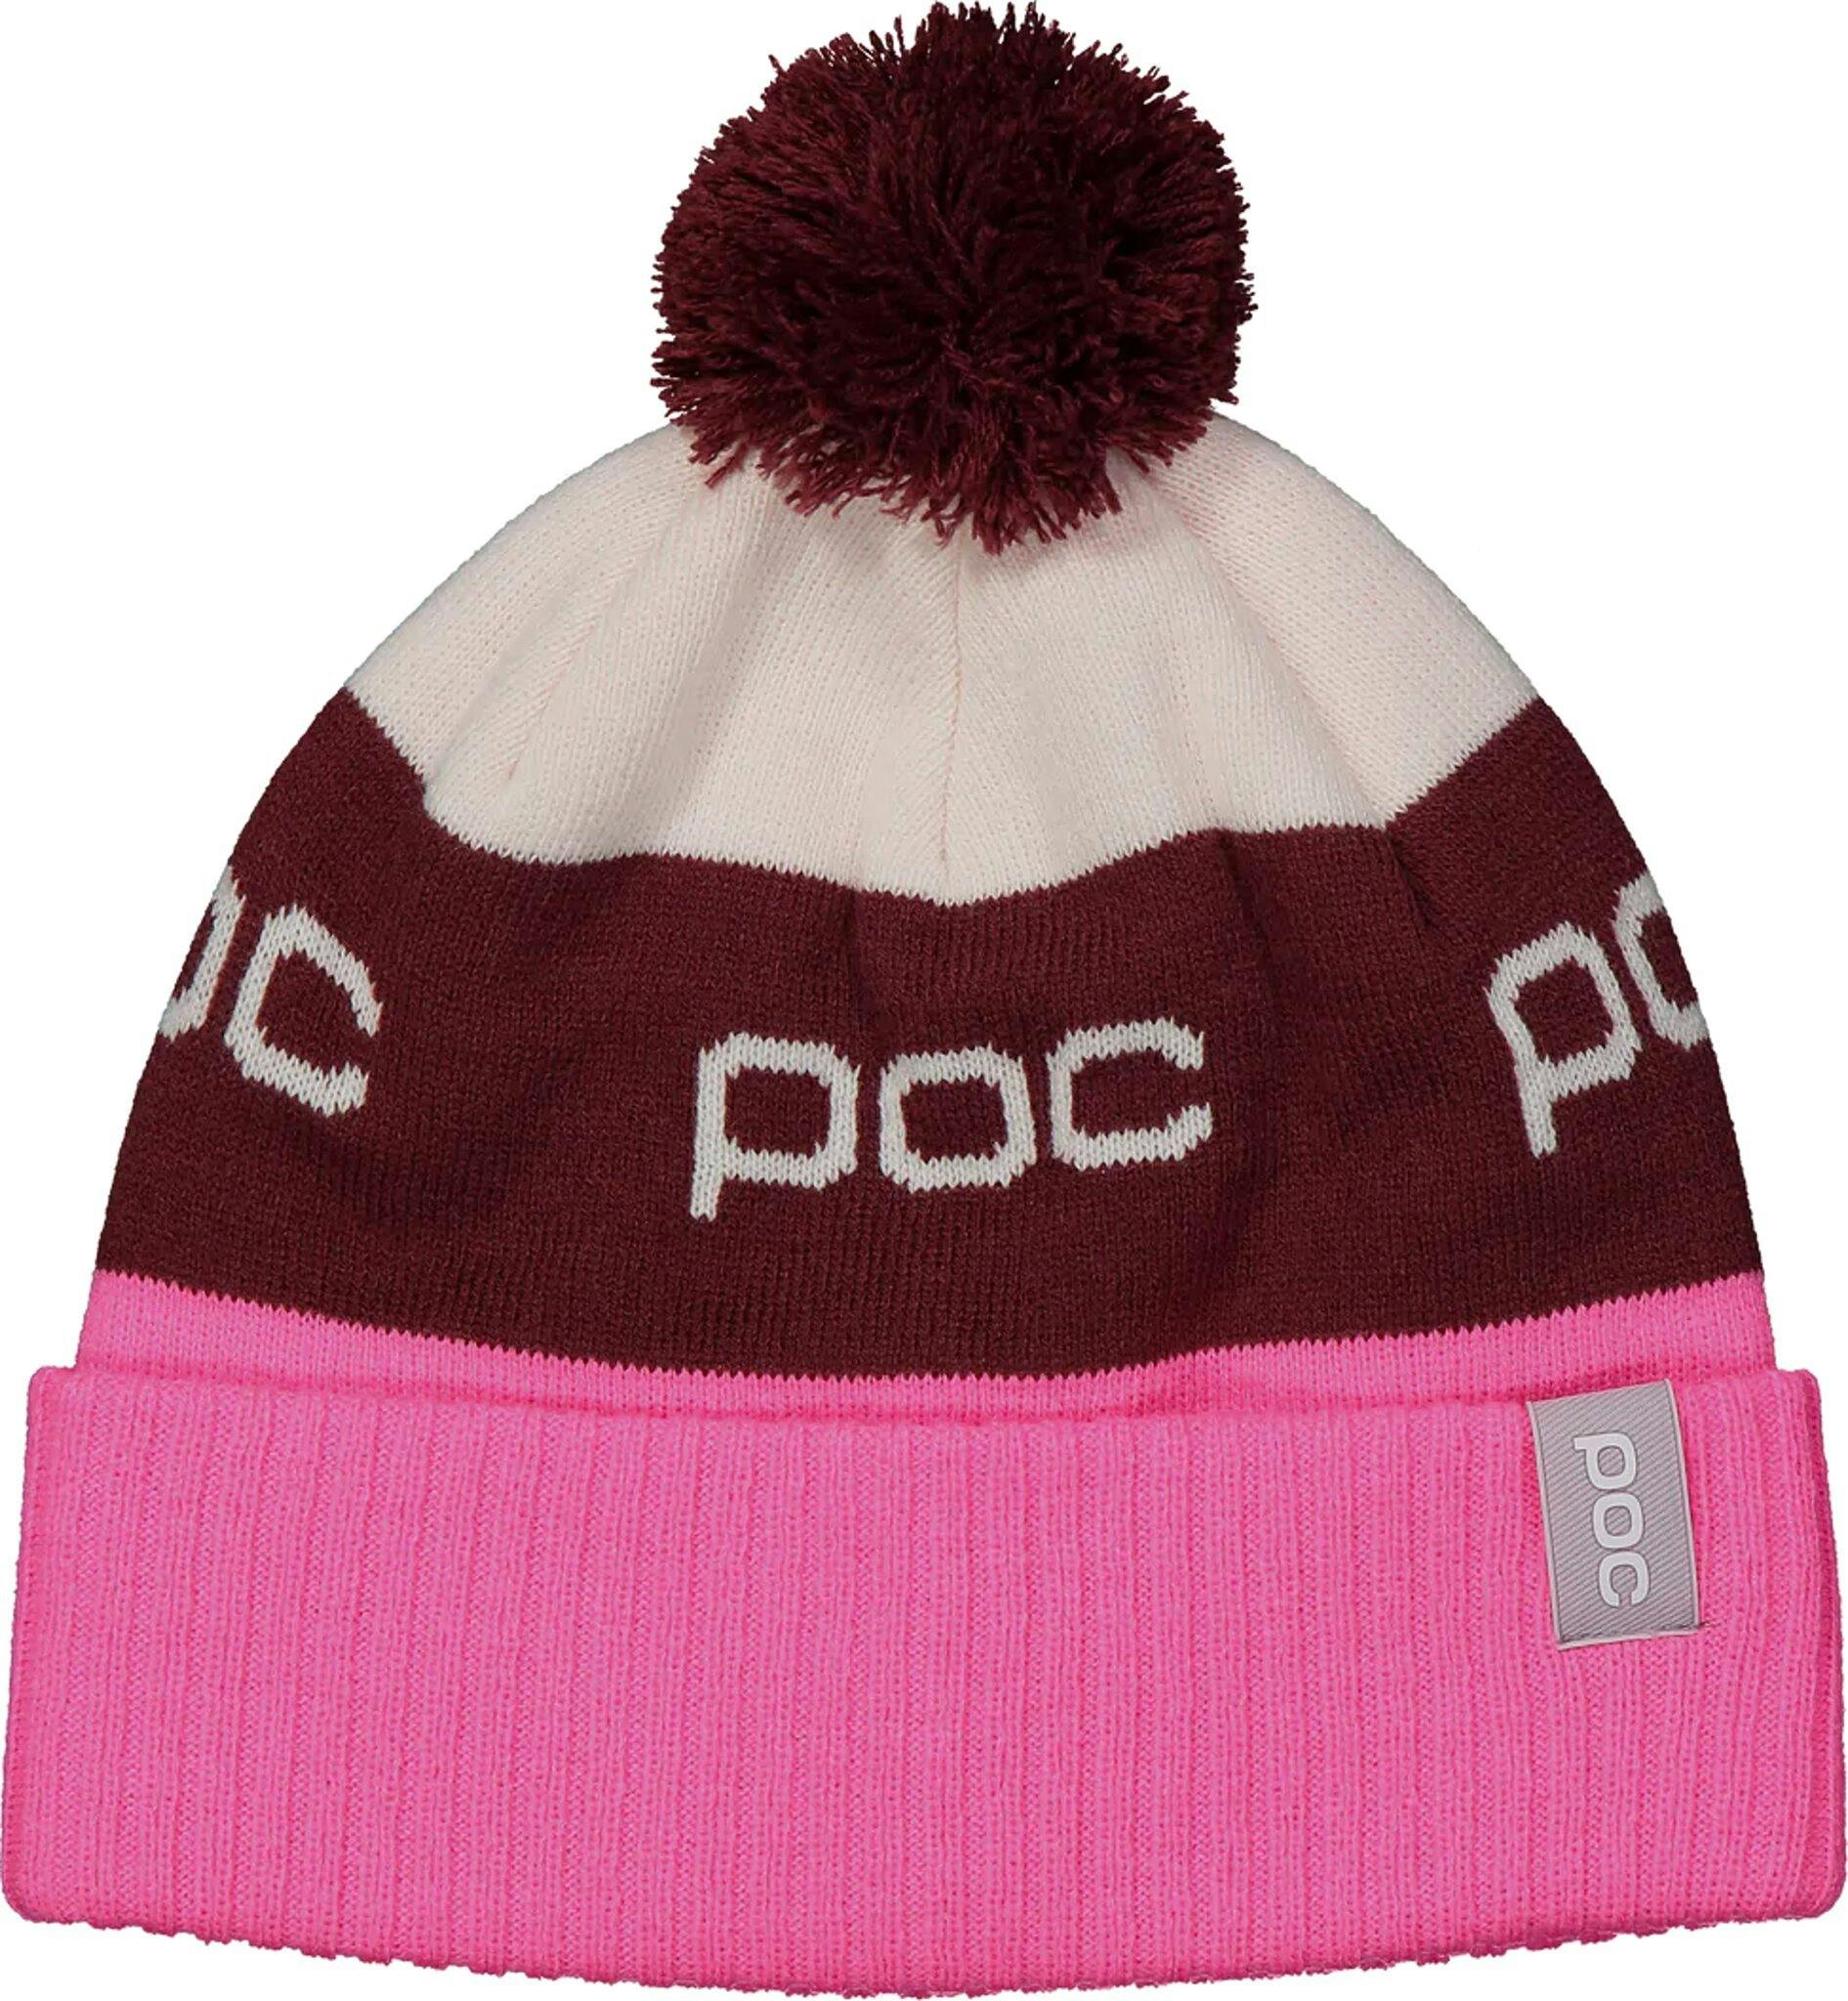 Product image for Pompom Beanie - Men's